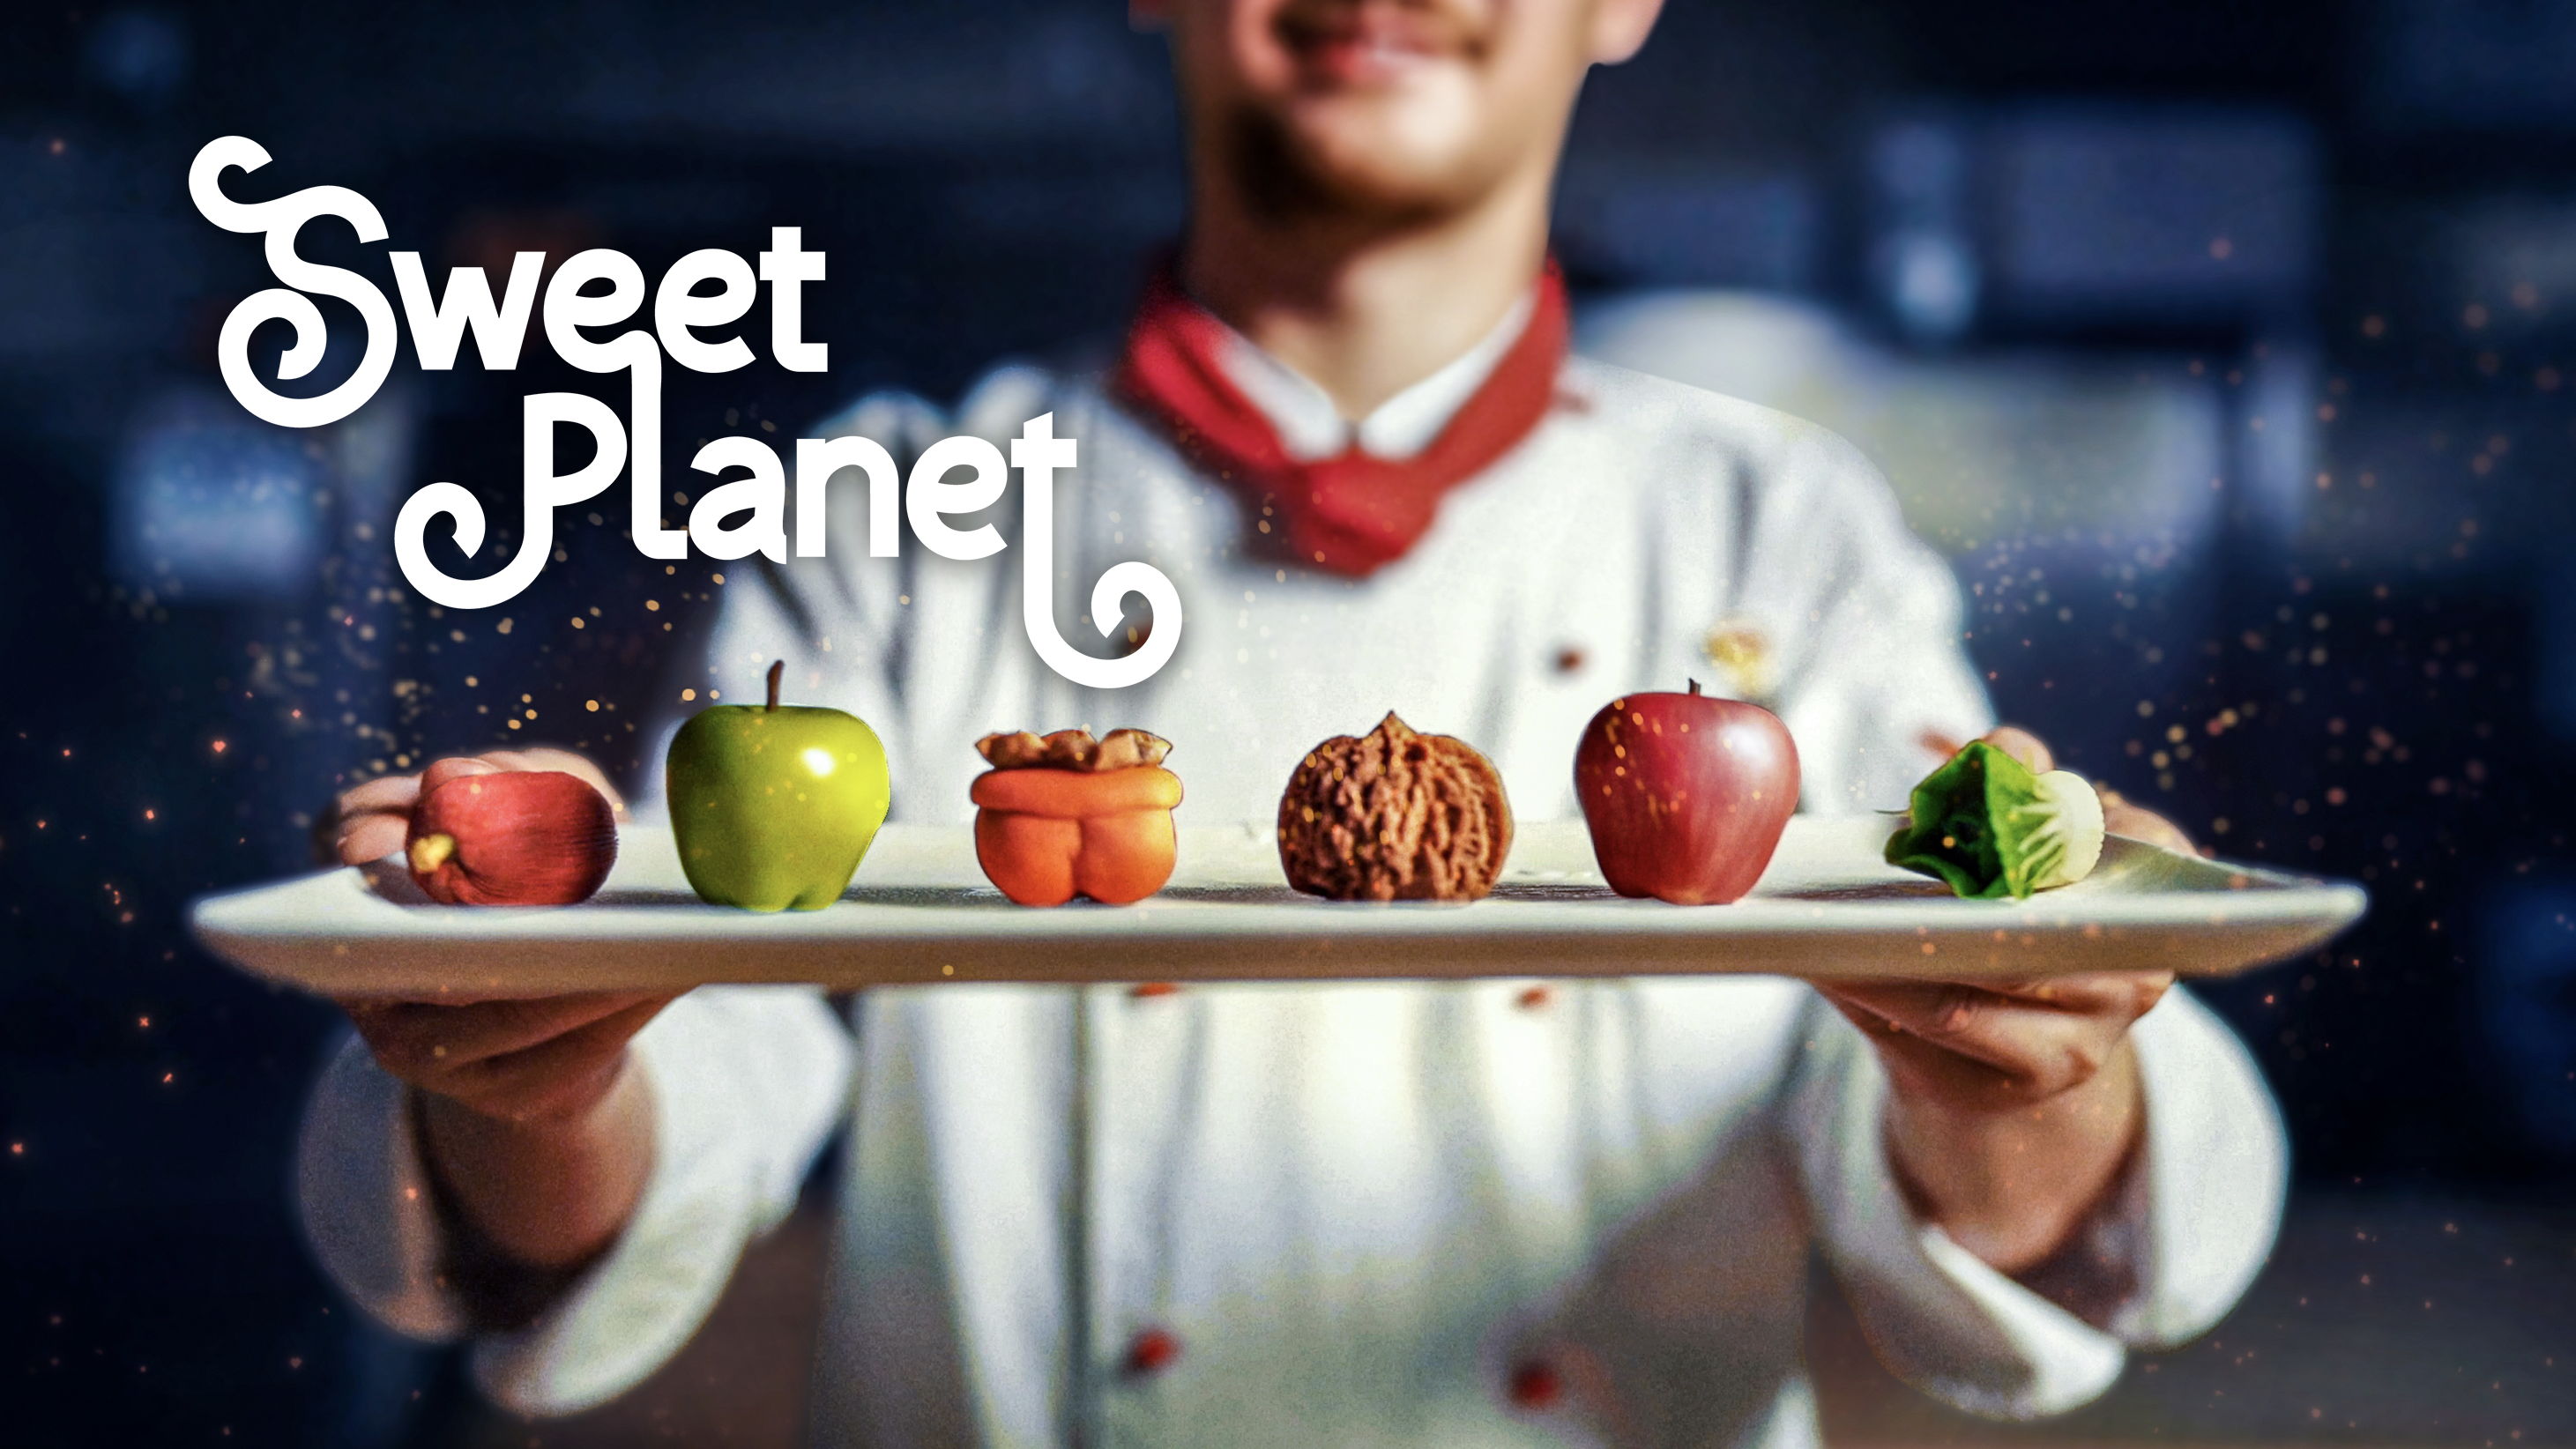 Sweet Planet to Premiere Across China on CGTN on March 29